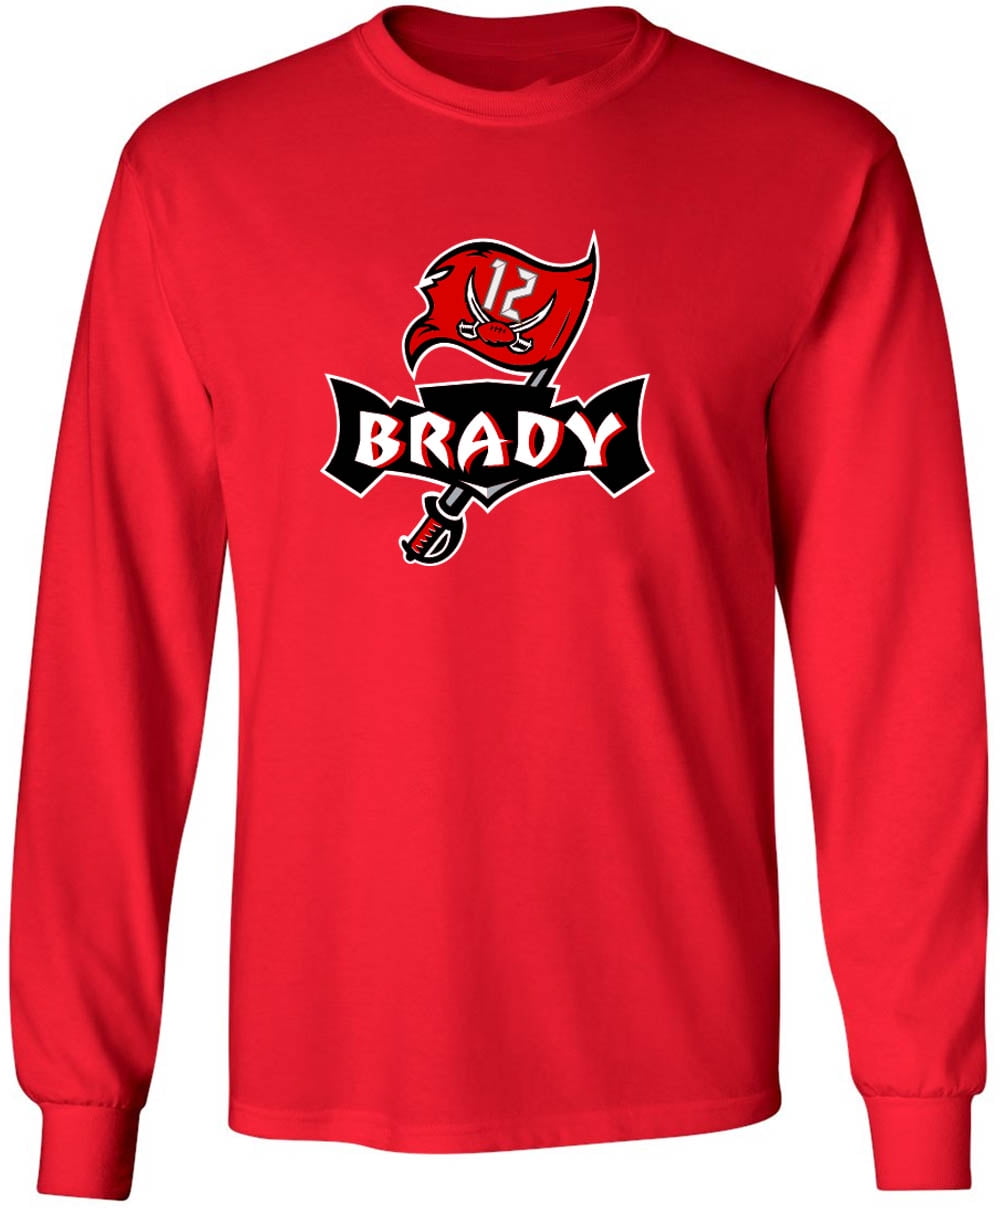 Majestic Threads Women's Majestic Threads Tom Brady Red/White Tampa Bay  Buccaneers Drip-Dye Player Name & Number Tri-Blend Crop T-Shirt